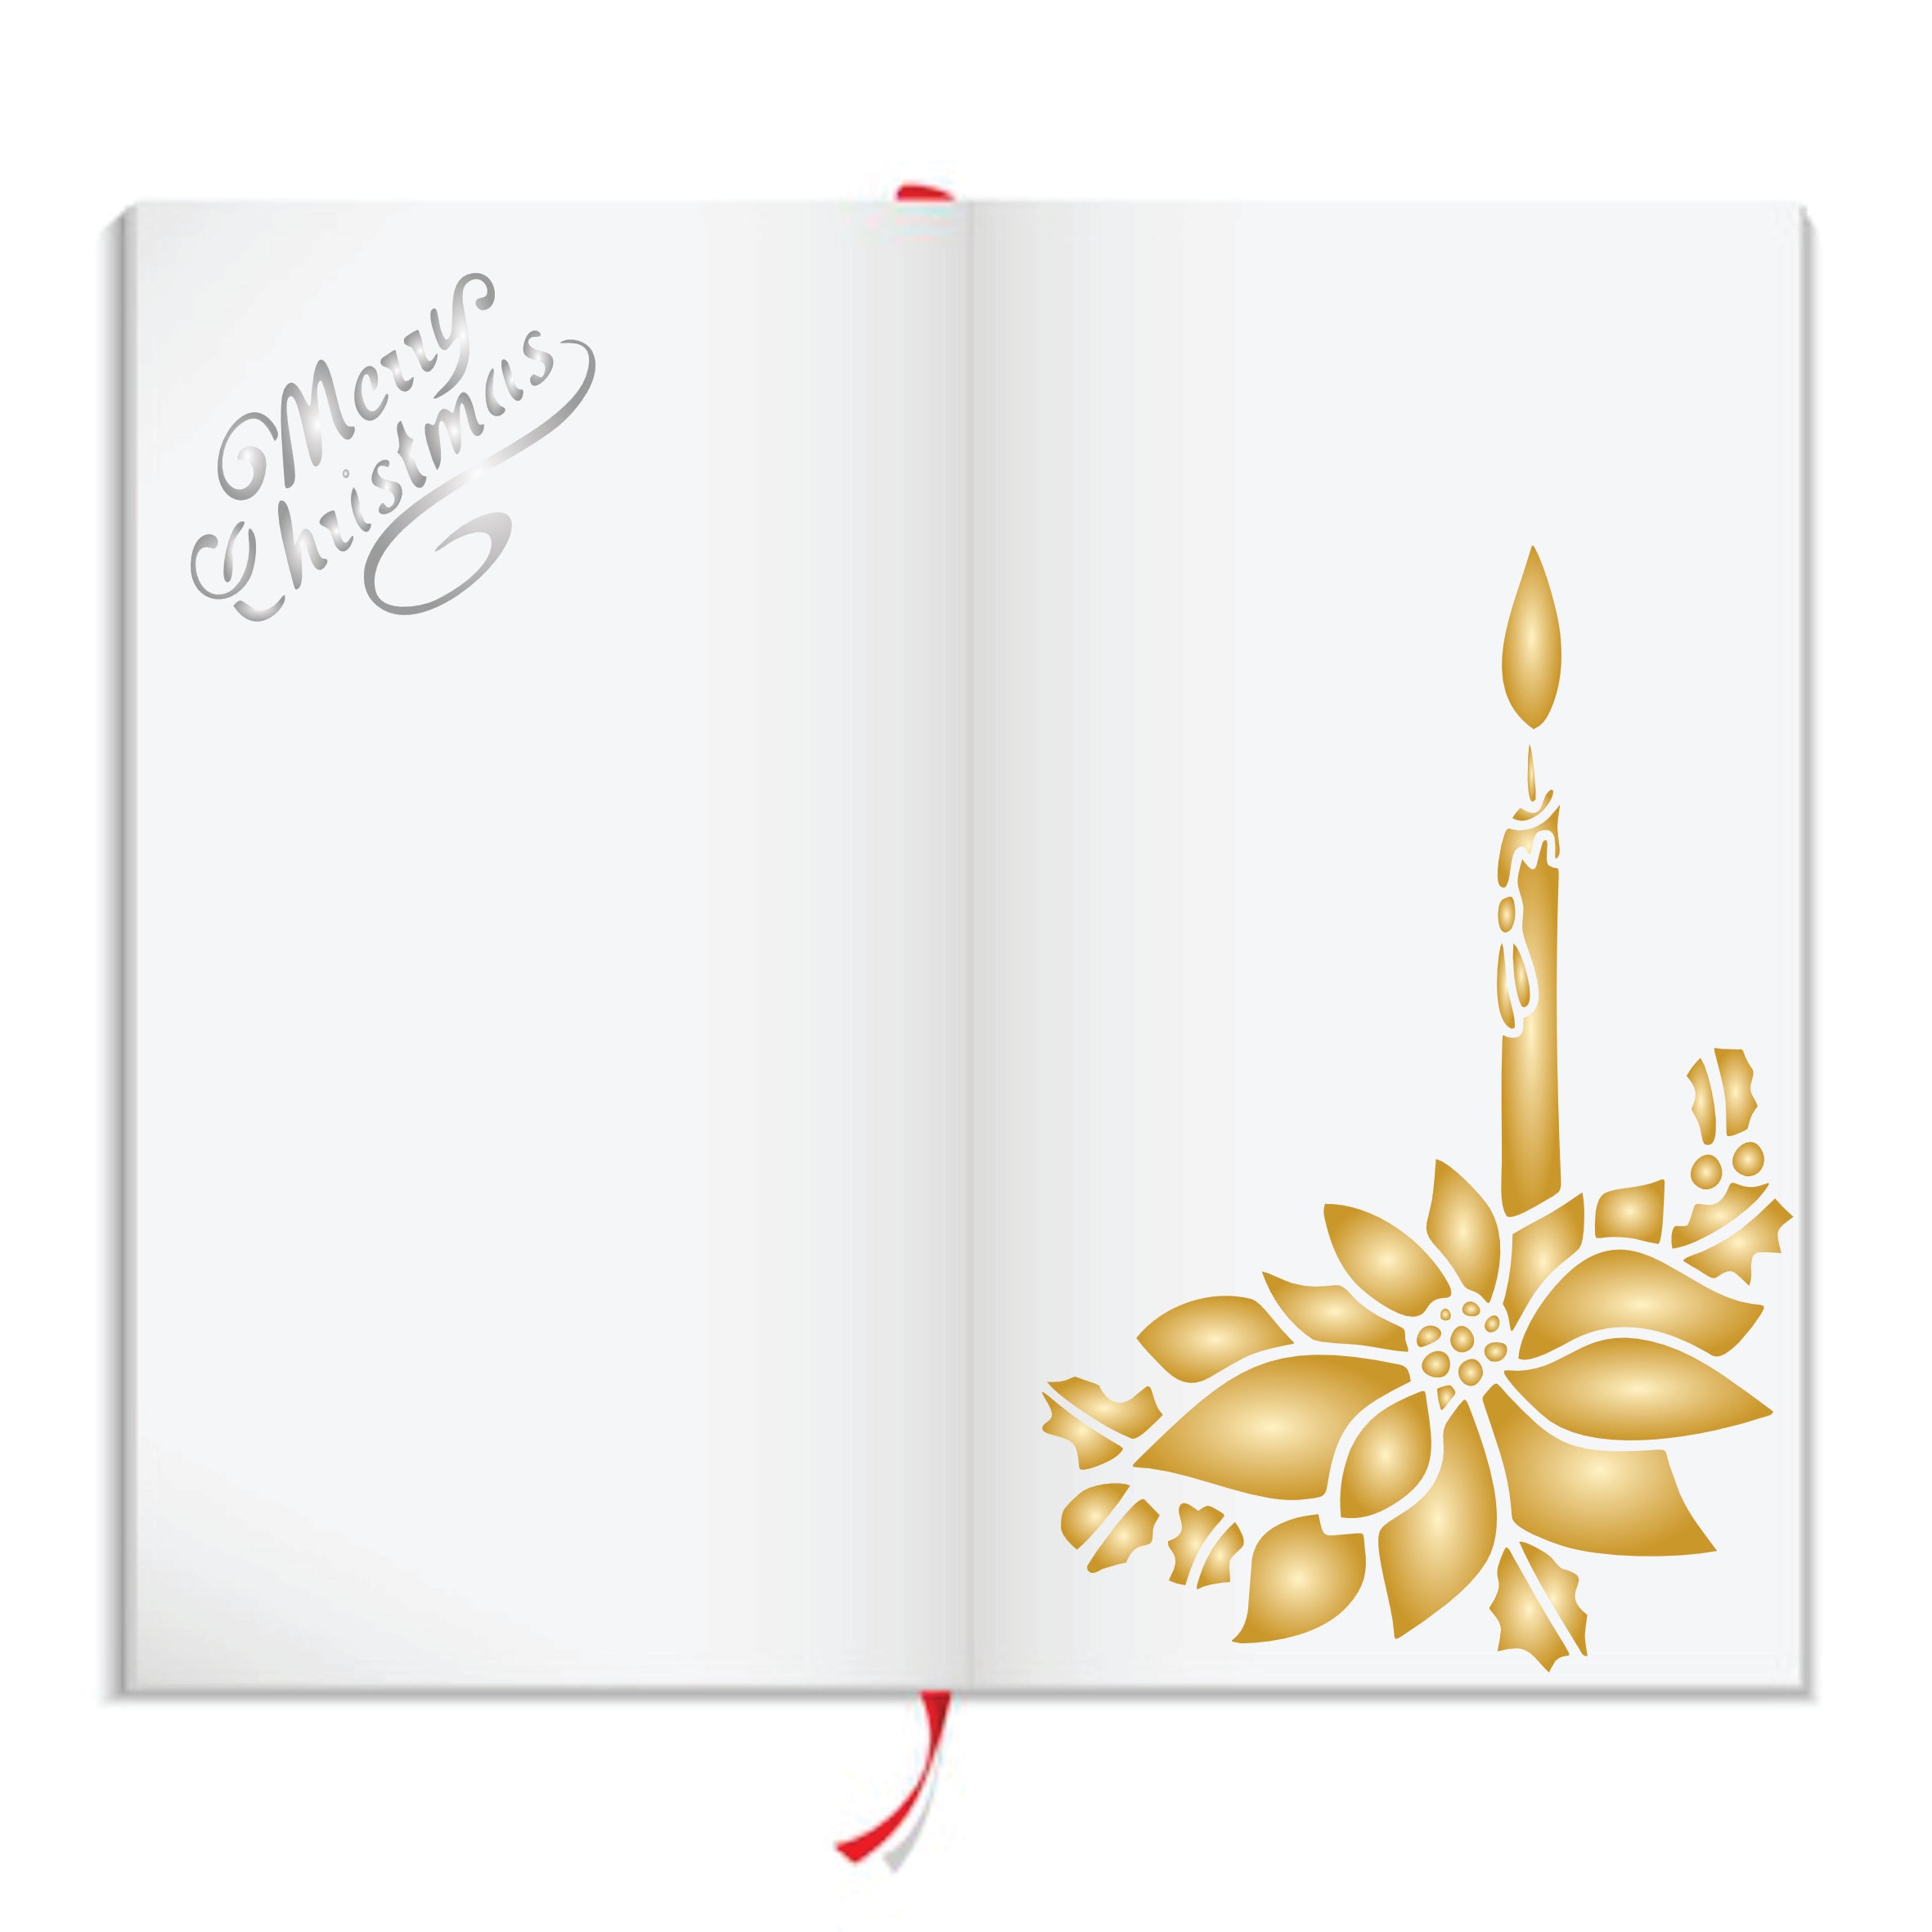 Poinsettia Candle Stencil - Merry Christmas Words Card Flower Candle